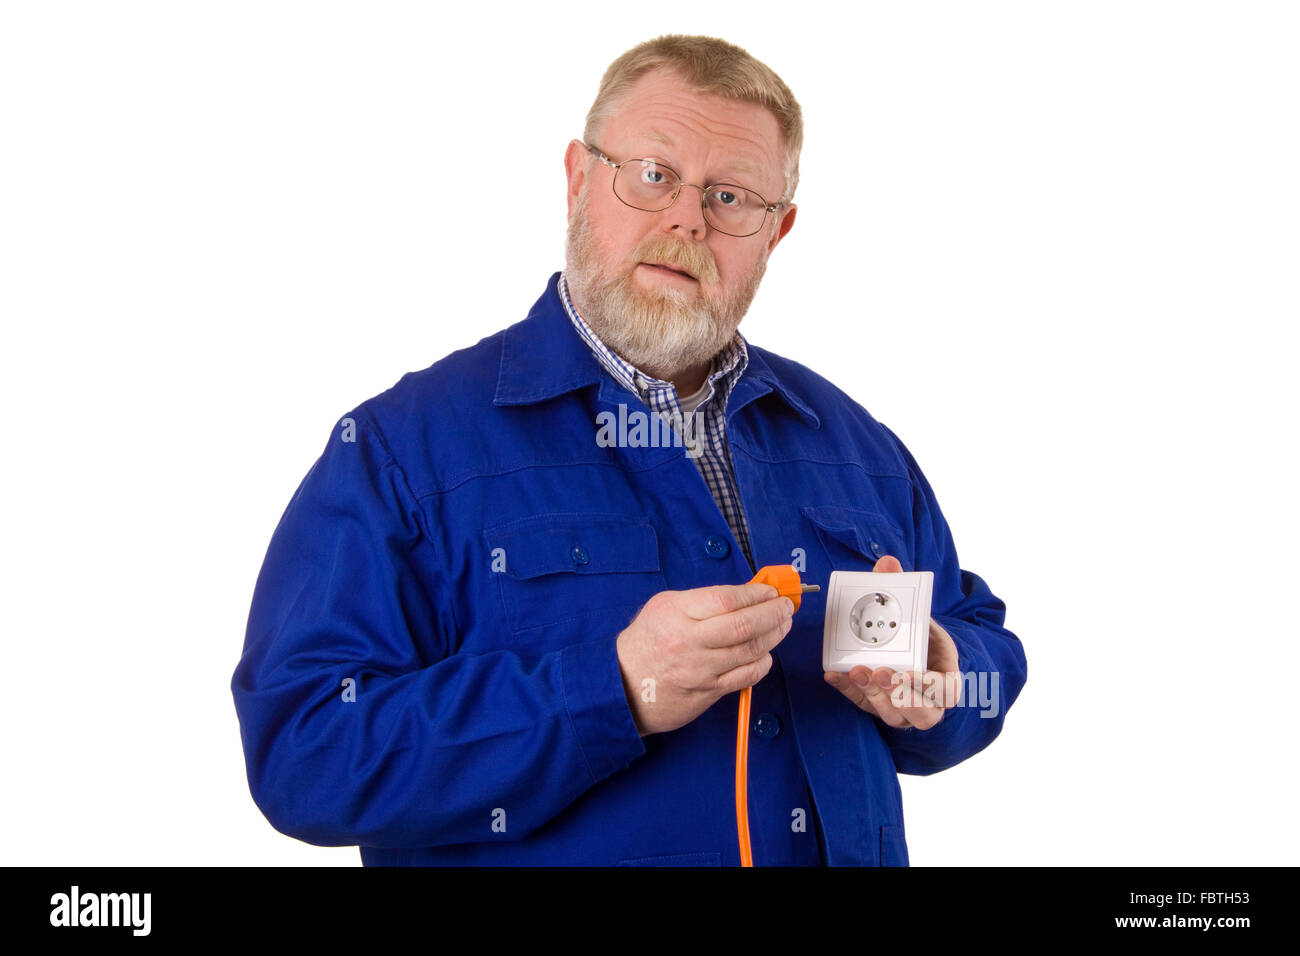 Electrician with power plug Stock Photo